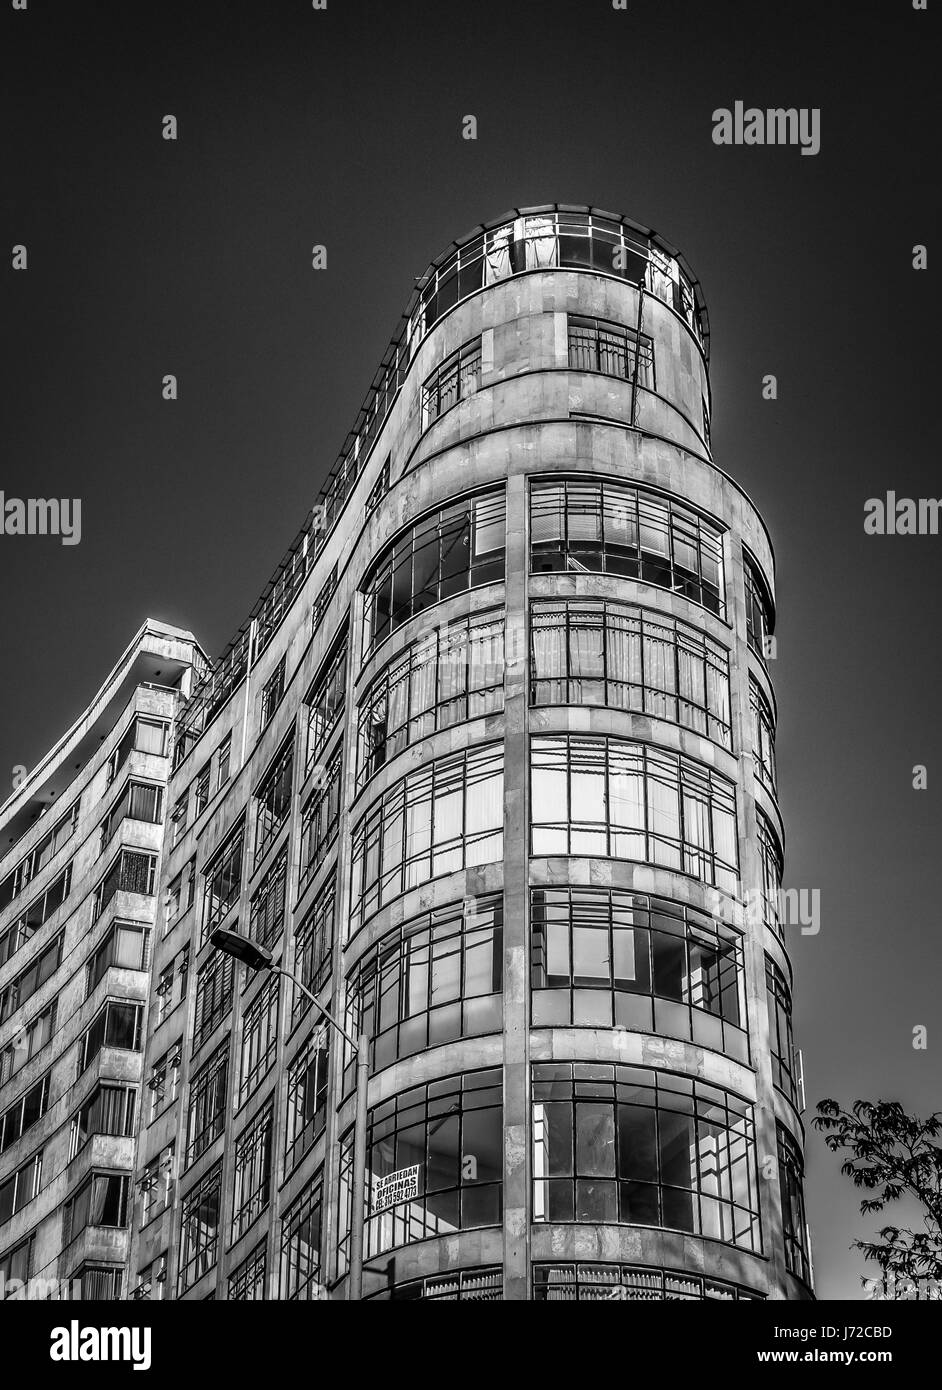 BOGOTA, COLOMBIA - Aug, 2016: Black and White building in Downtown Bogota - Bogota, Colombia Stock Photo